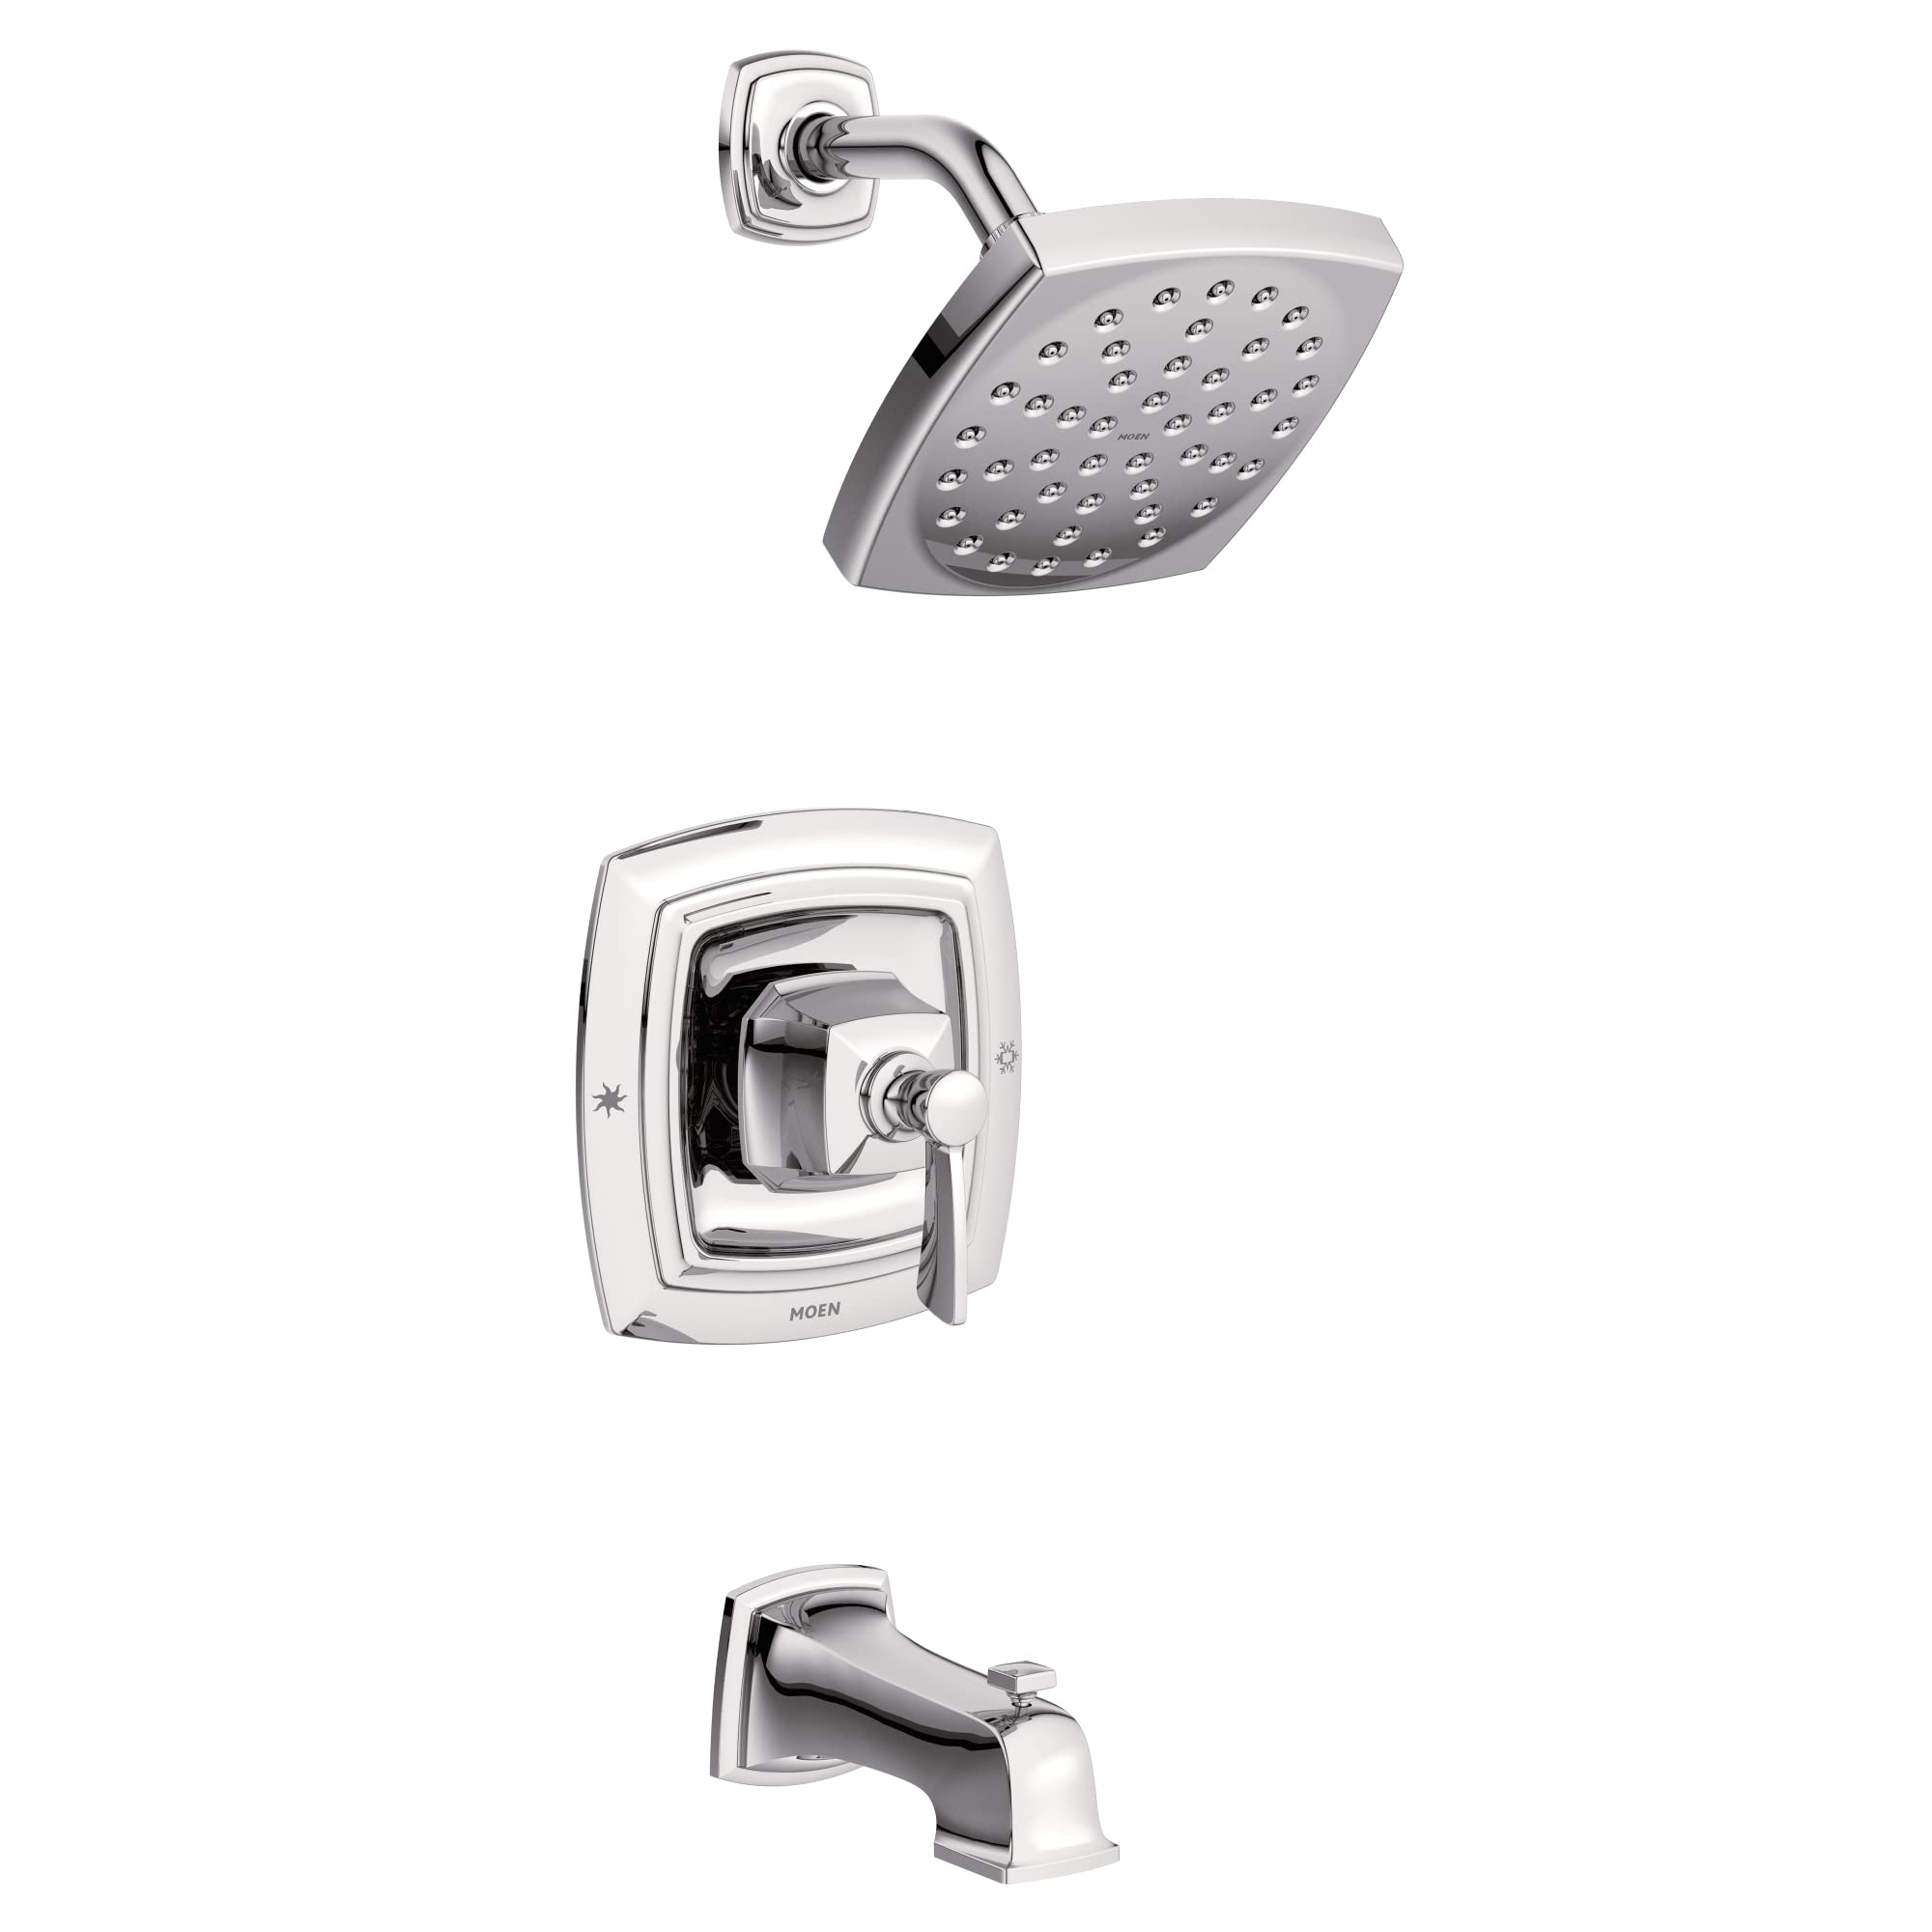 Moen Conway Chrome Posi-Temp Tub and Shower Trim Set Featuring Square Showerhead, Shower Lever Handle, and Tub Spout, Valve Included, 82922